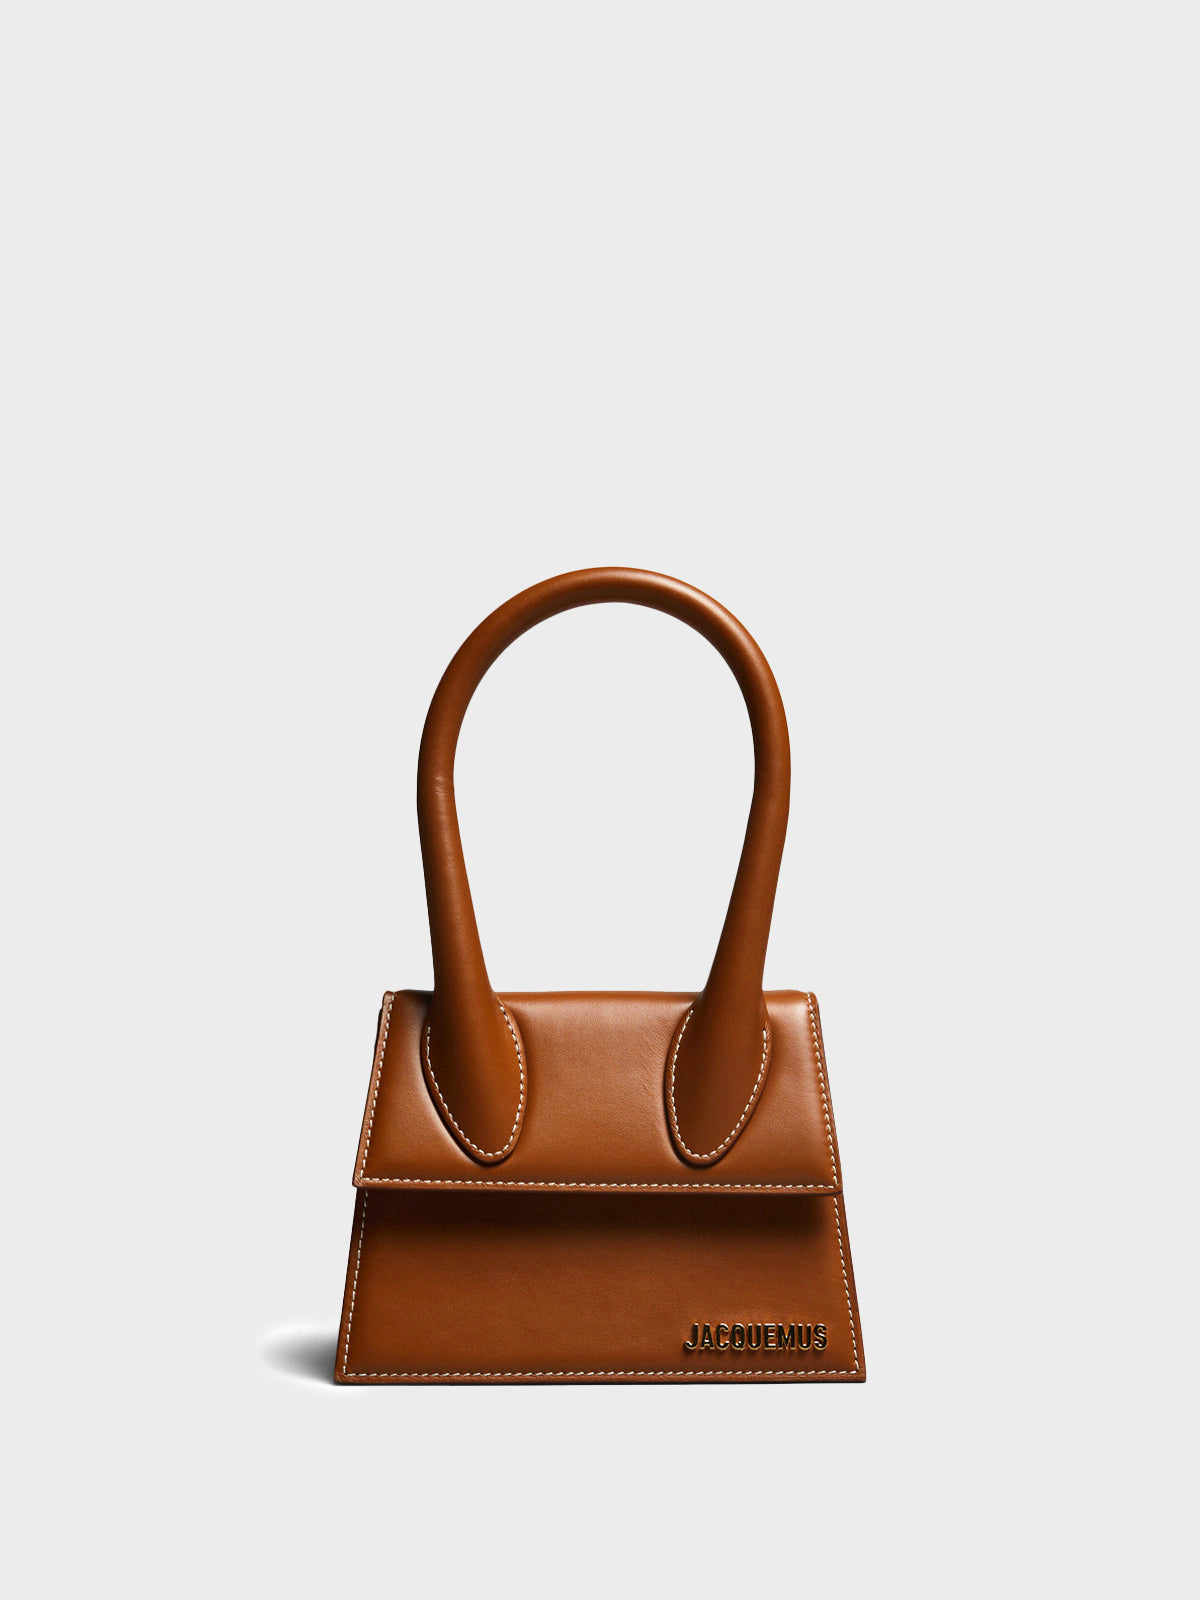 Le Chiquito Moyen Bag in Light Brown